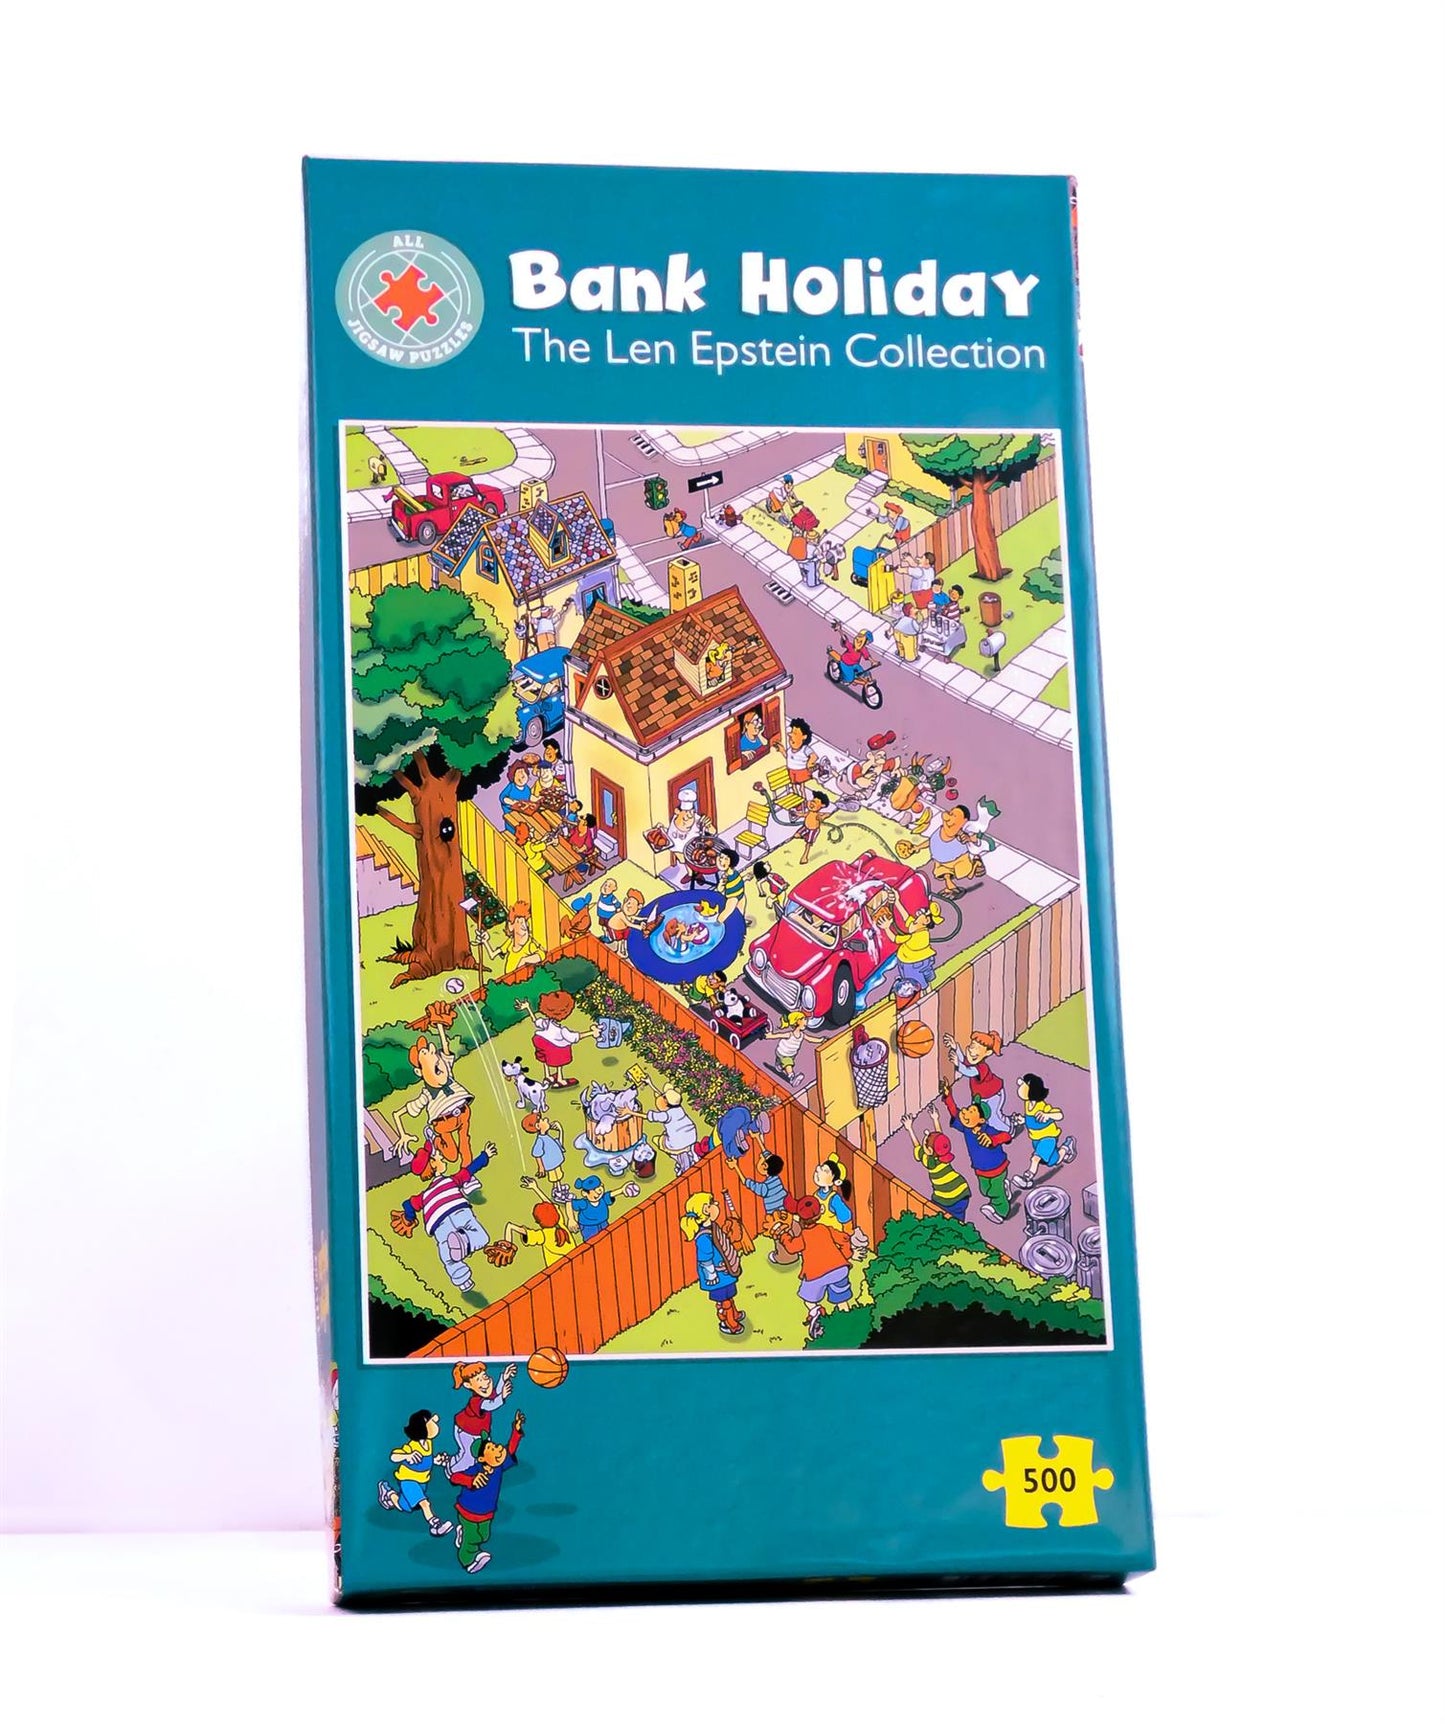 Bank holiday 500 Piece Jigsaw puzzle